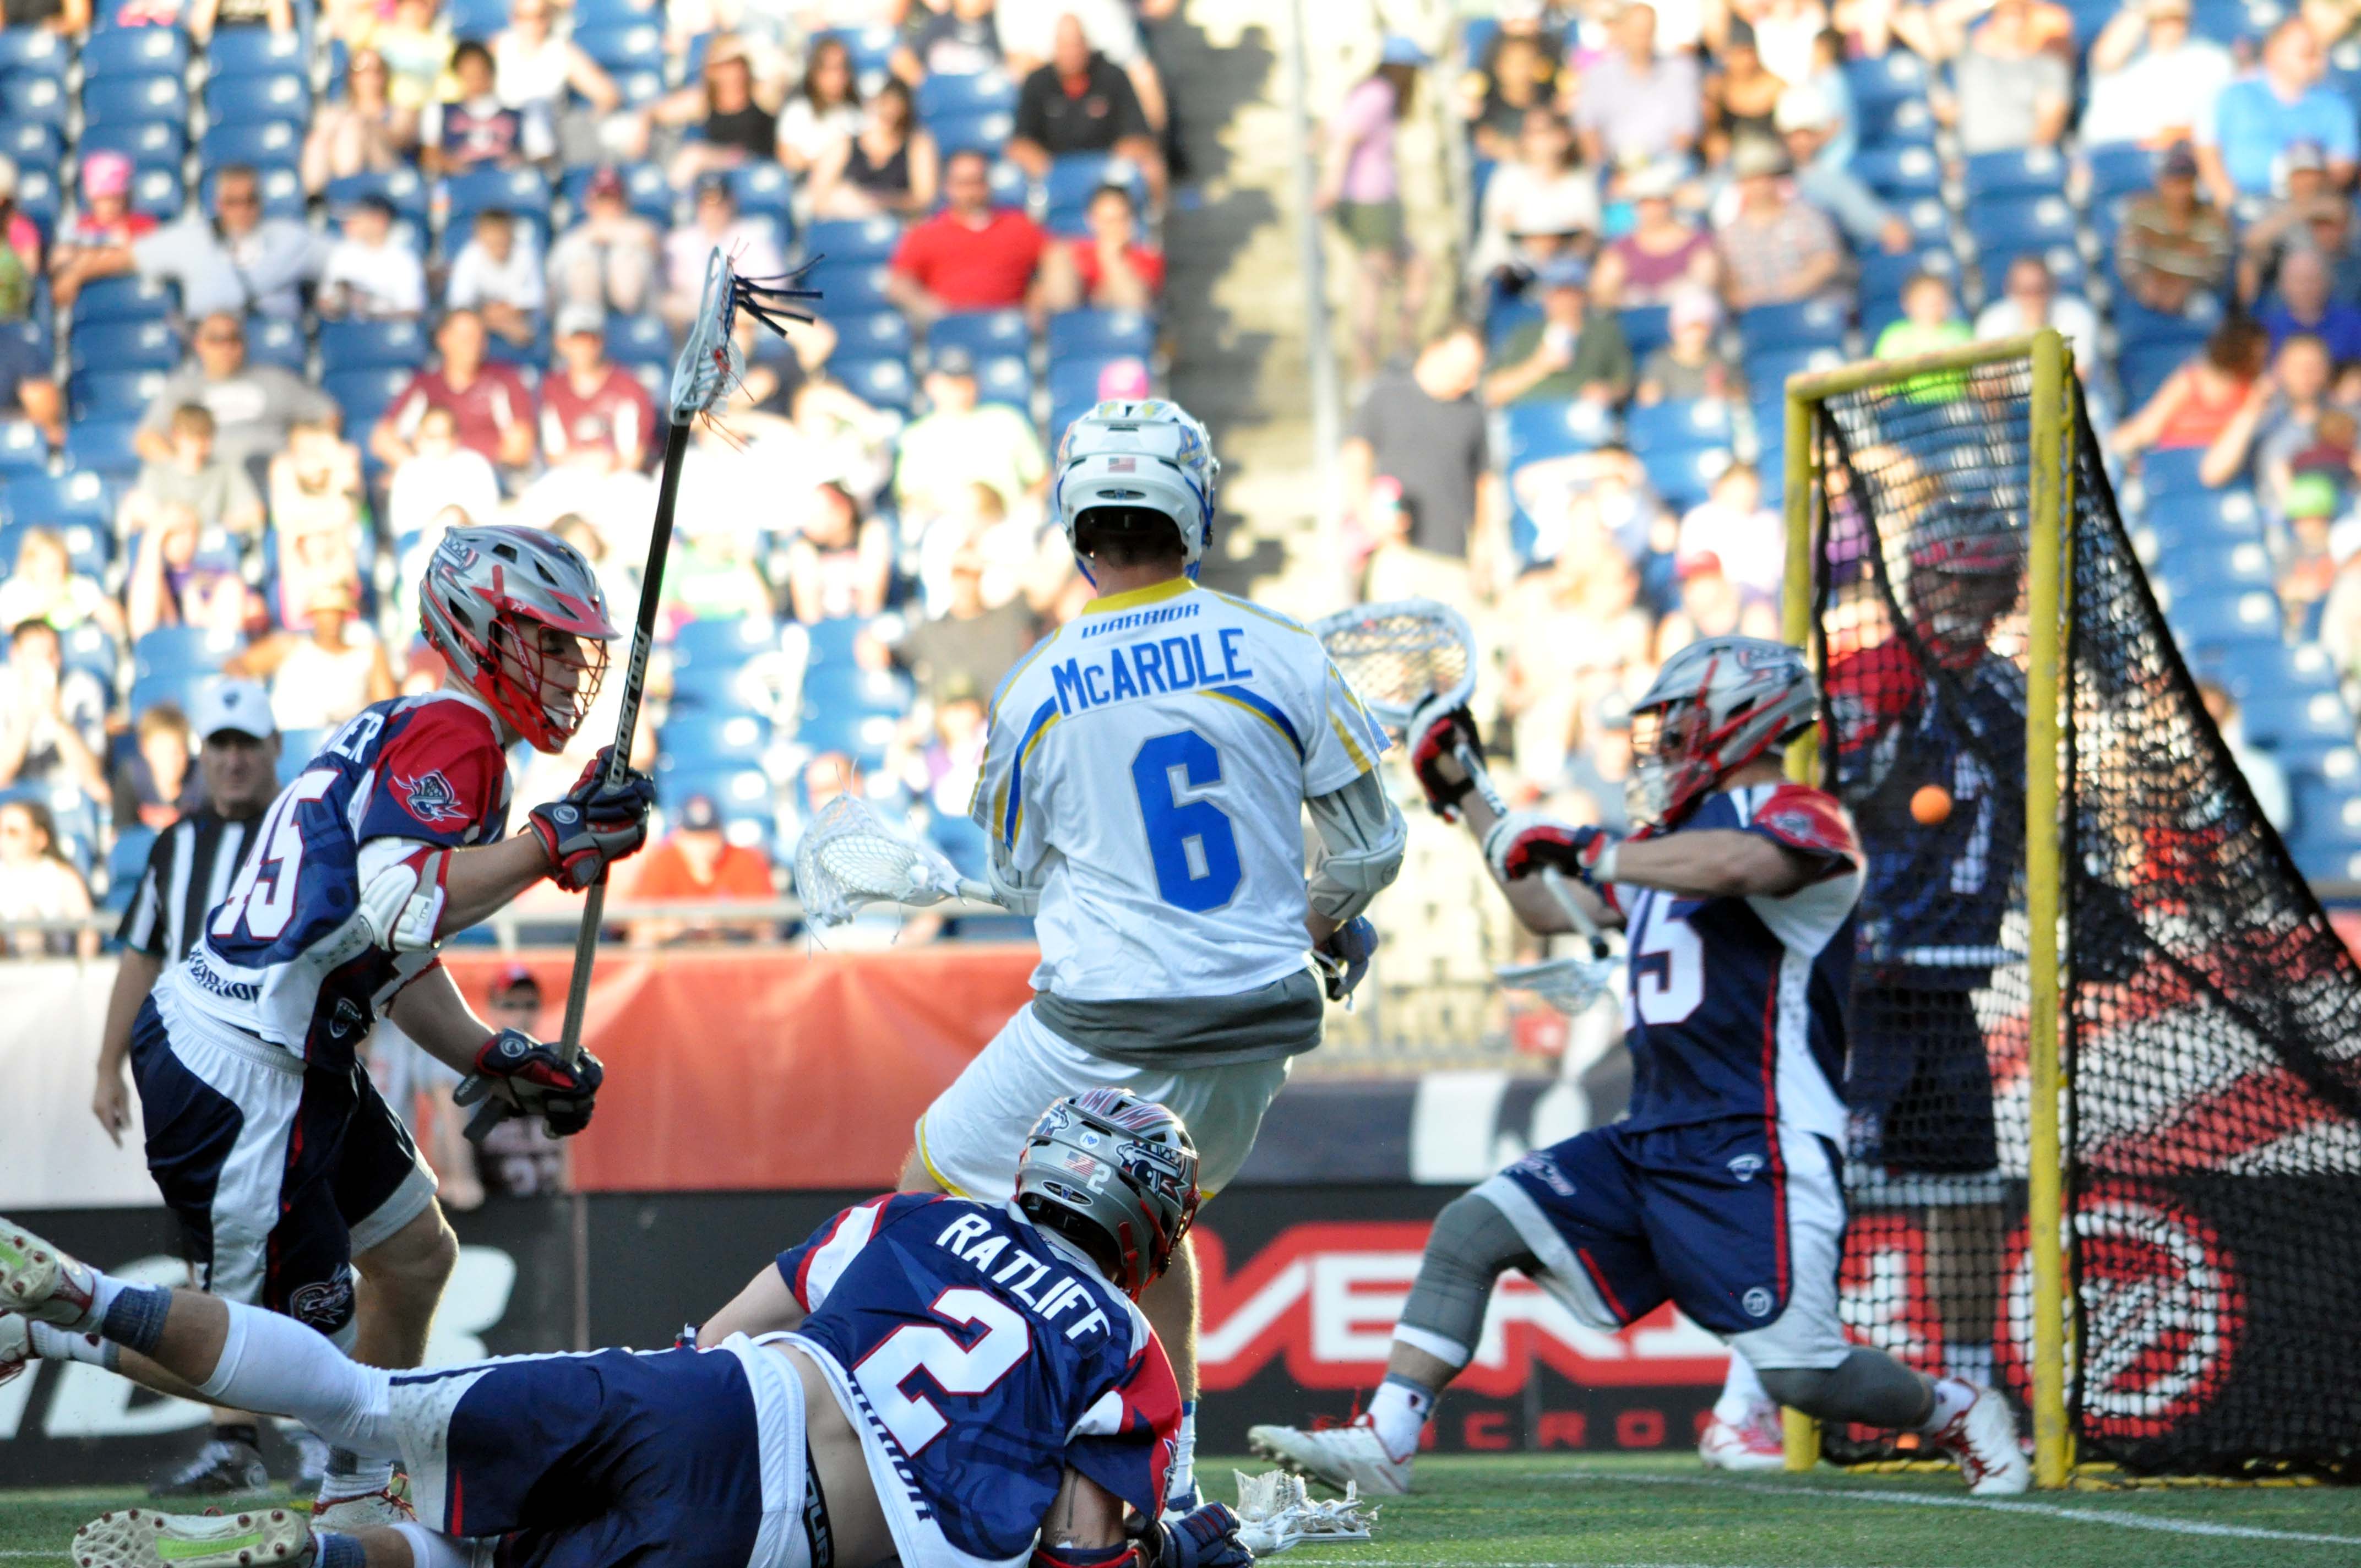 Final Roster Announced for 2015 MLL All-Star Game – In Lacrosse We Trust4288 x 2848